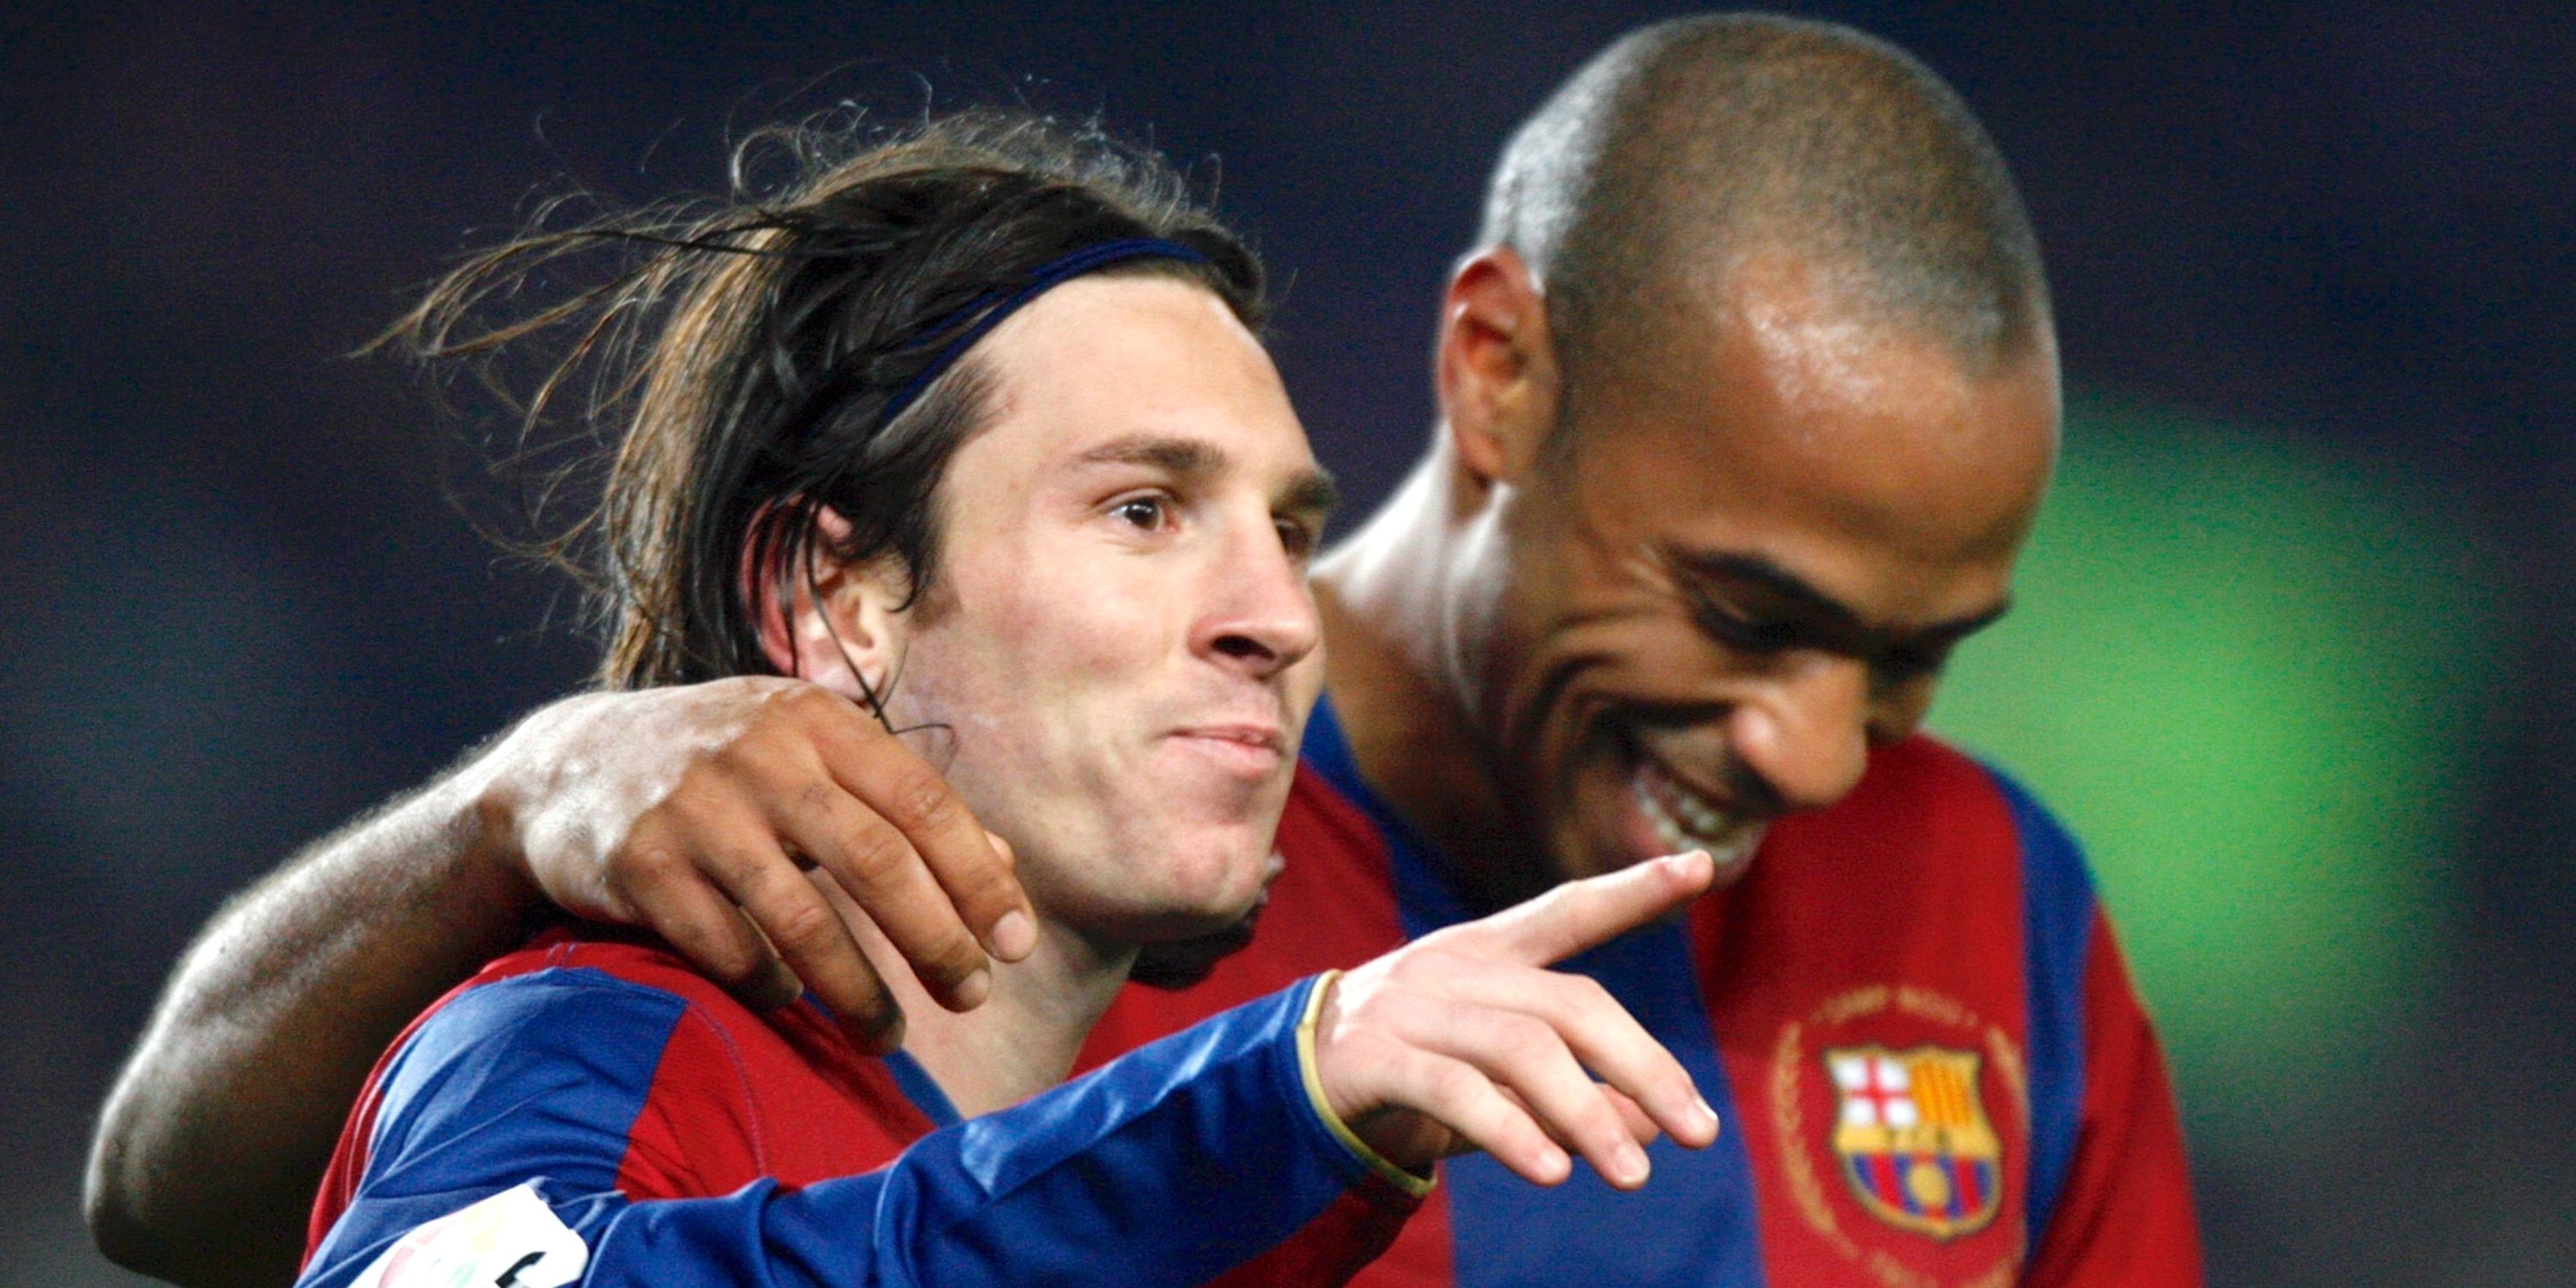 Thierry Henry smiling with his arm round Lionel Messi